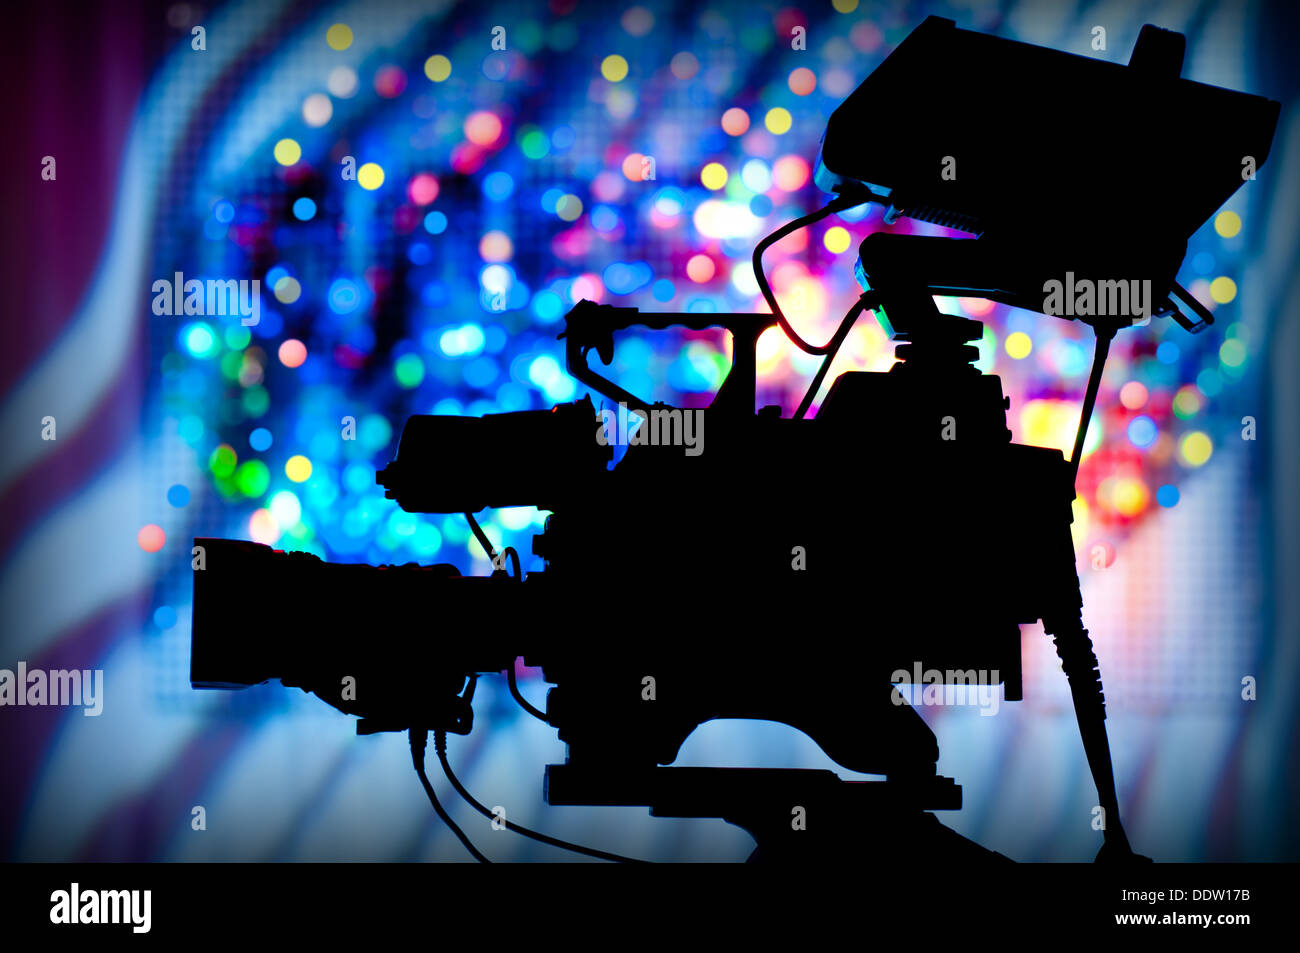 silhouette of a professional television camera on tripod  Stock Photo